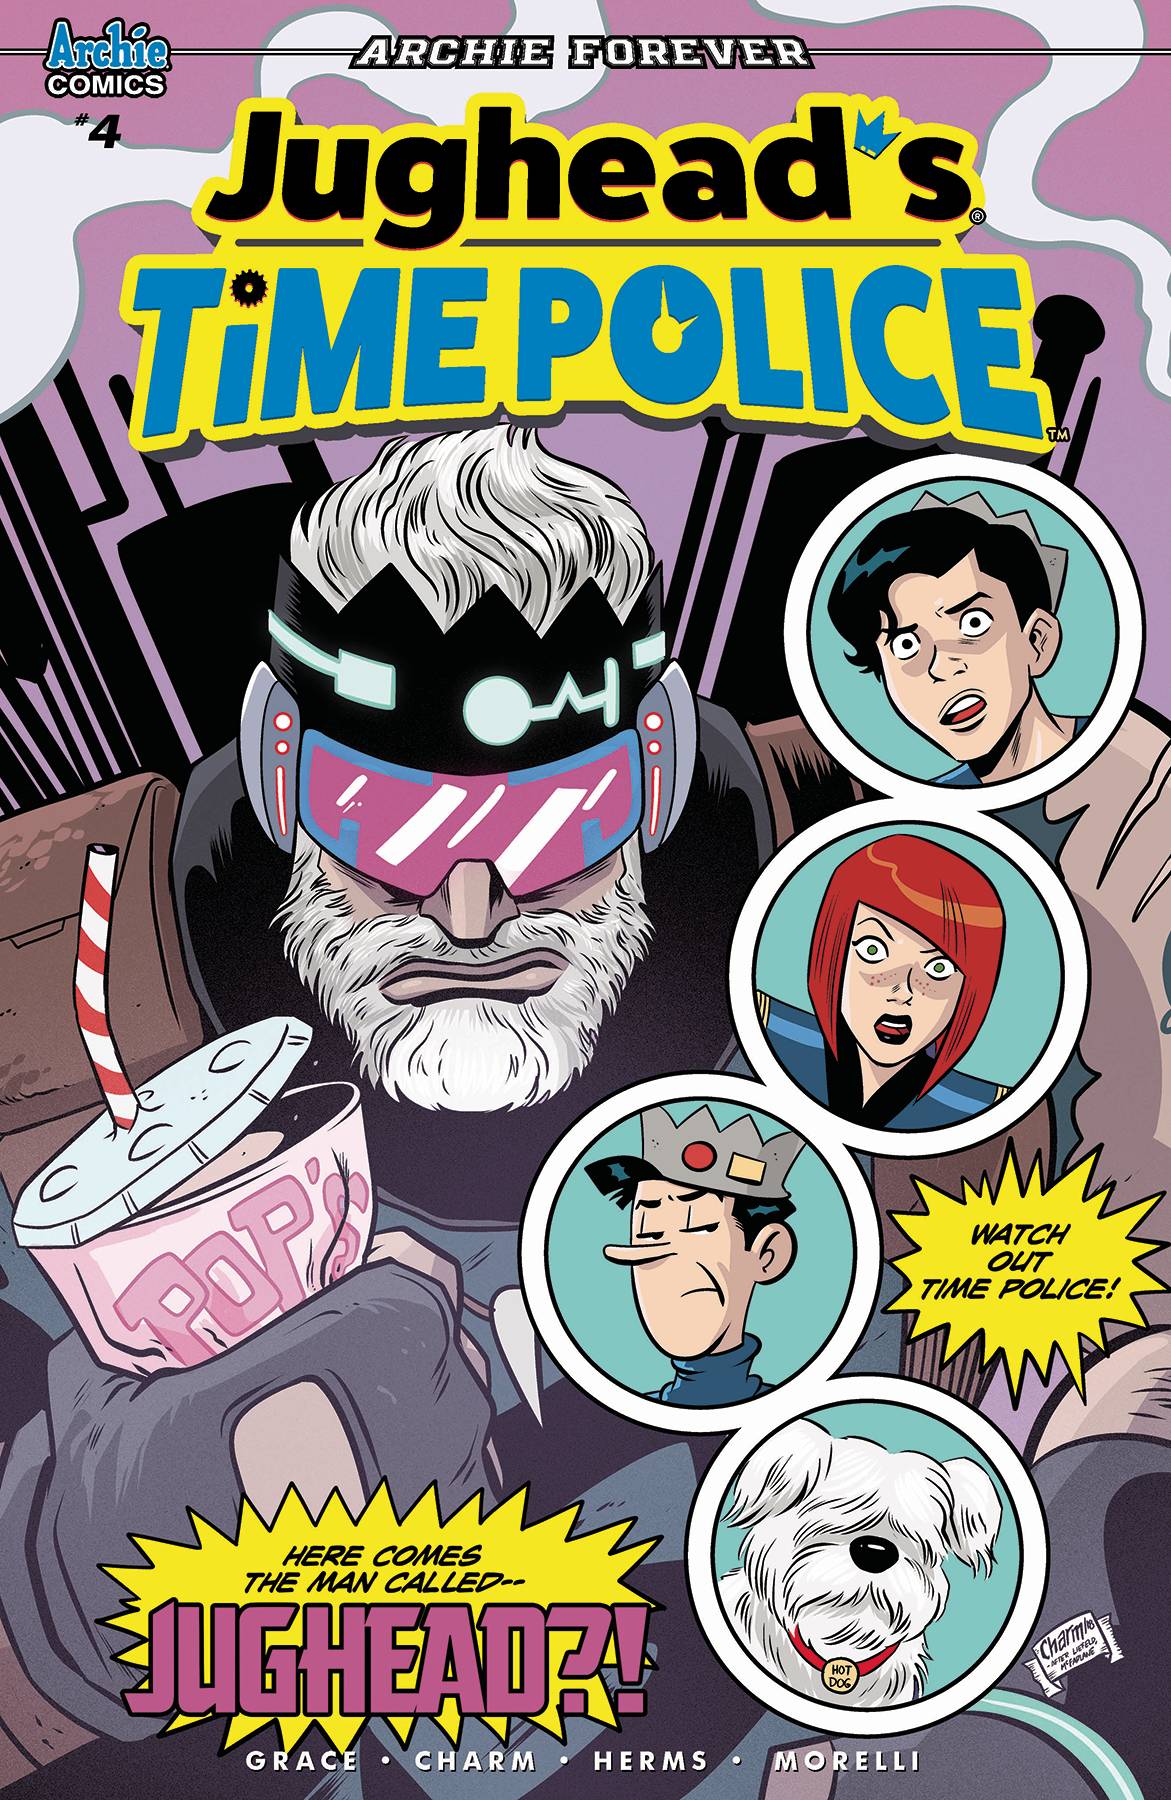 Jughead Time Police #4 Cover A Charm (Of 5)